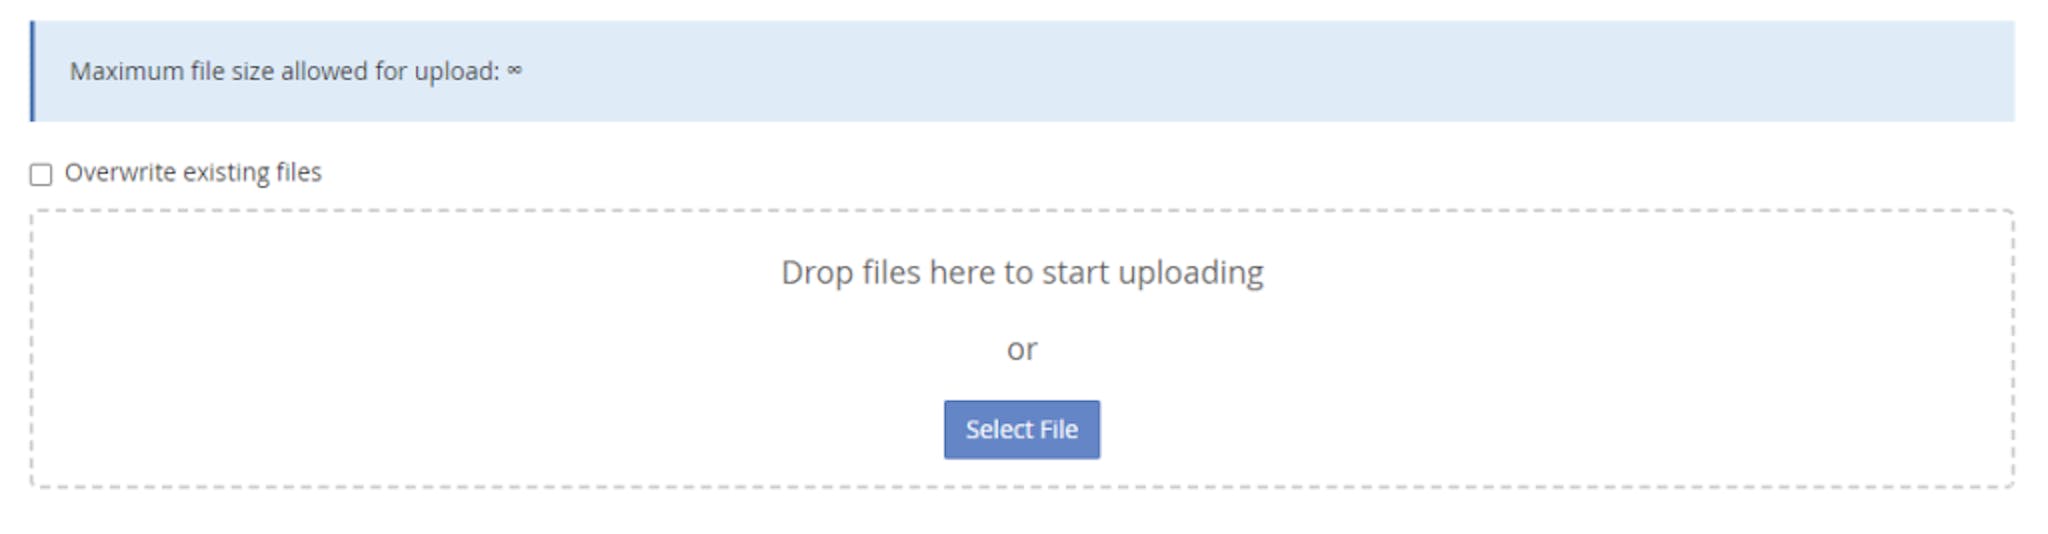 Transfer Your Website to a New Host - File manager interstitial for uploading new files